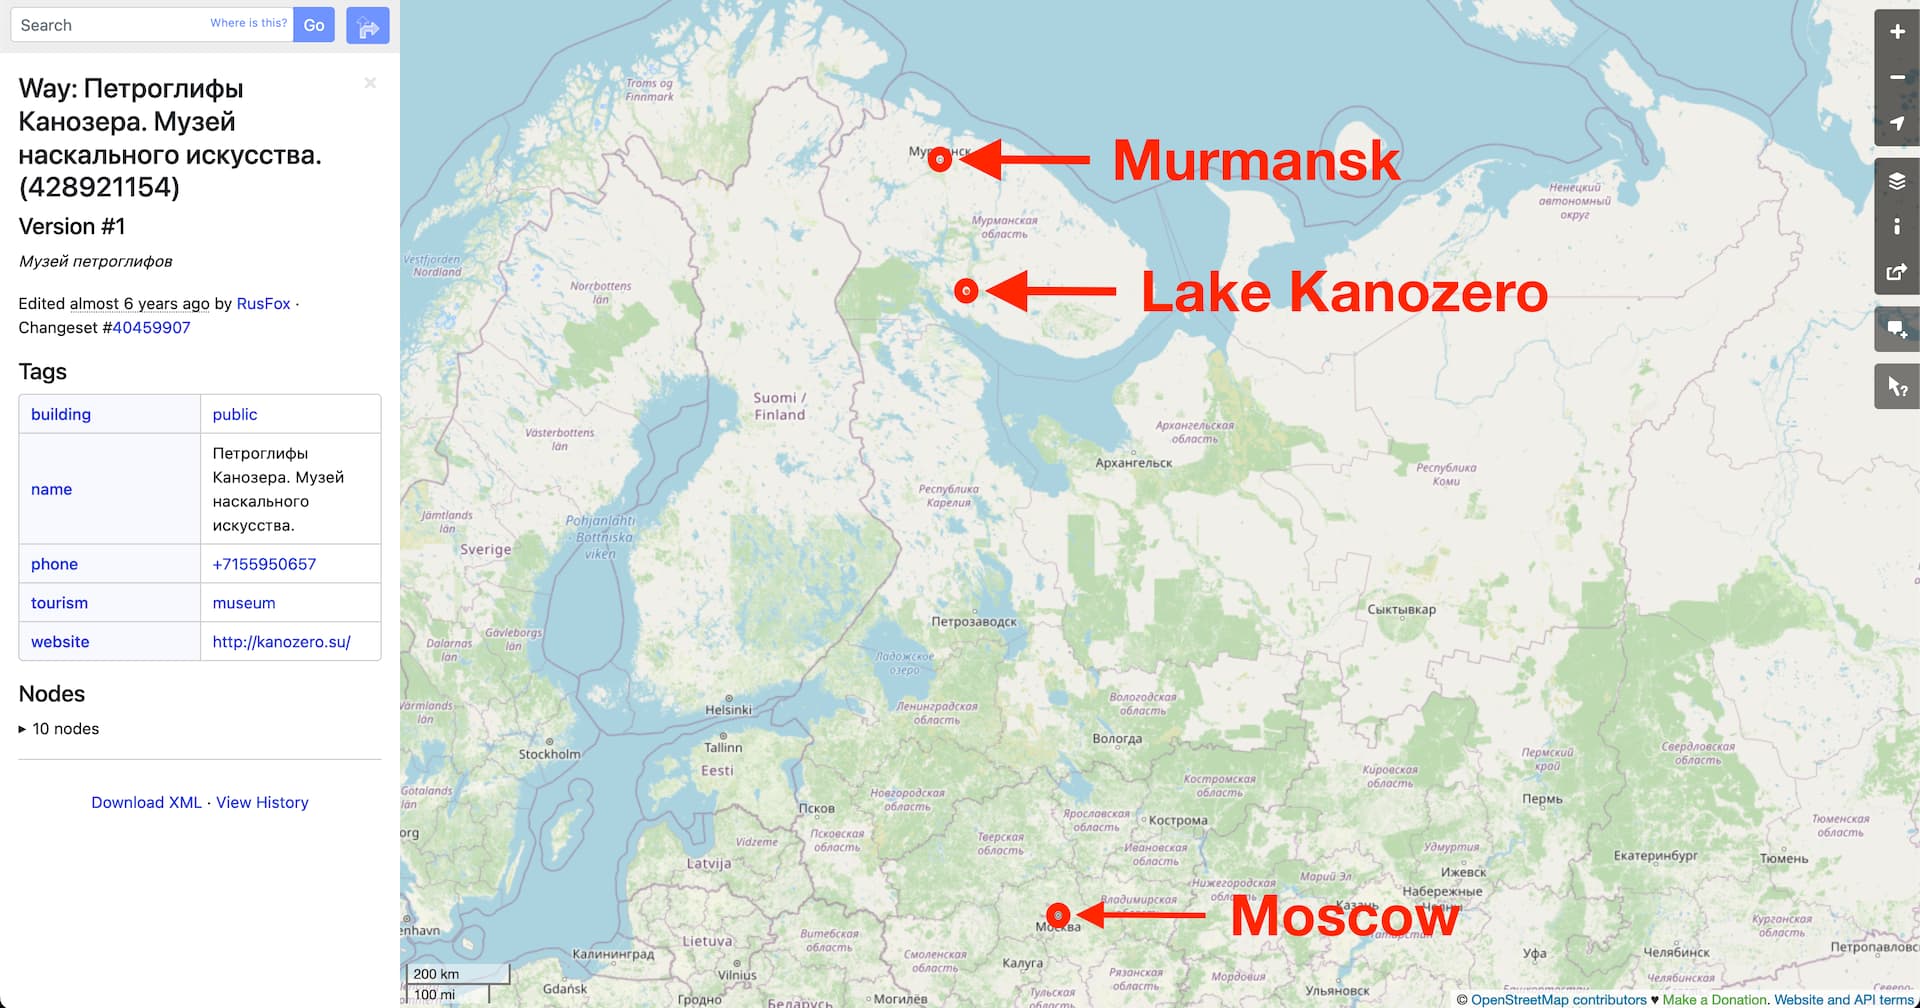 Map highlighting the location of the petroglyphs, about 200 km south of Murmansk on the Kola peninsula